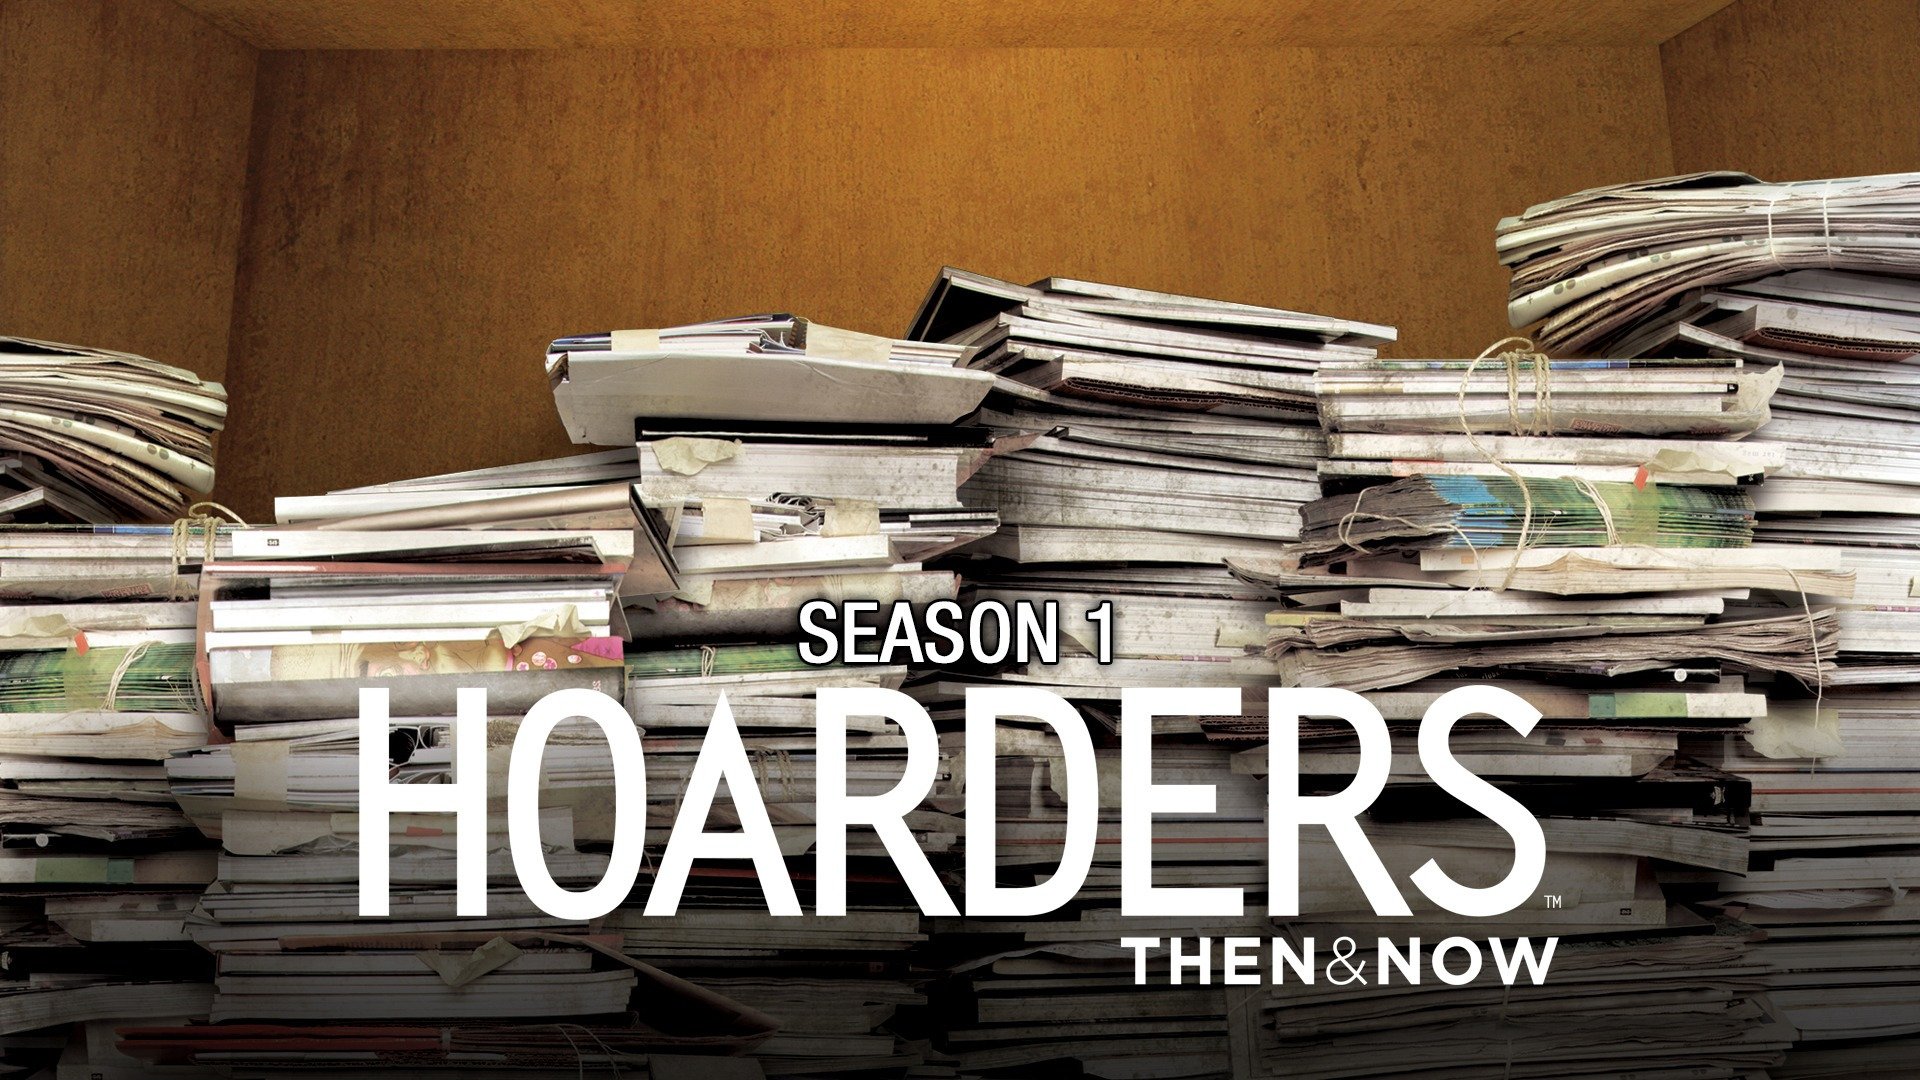 aetv hoarders before and after